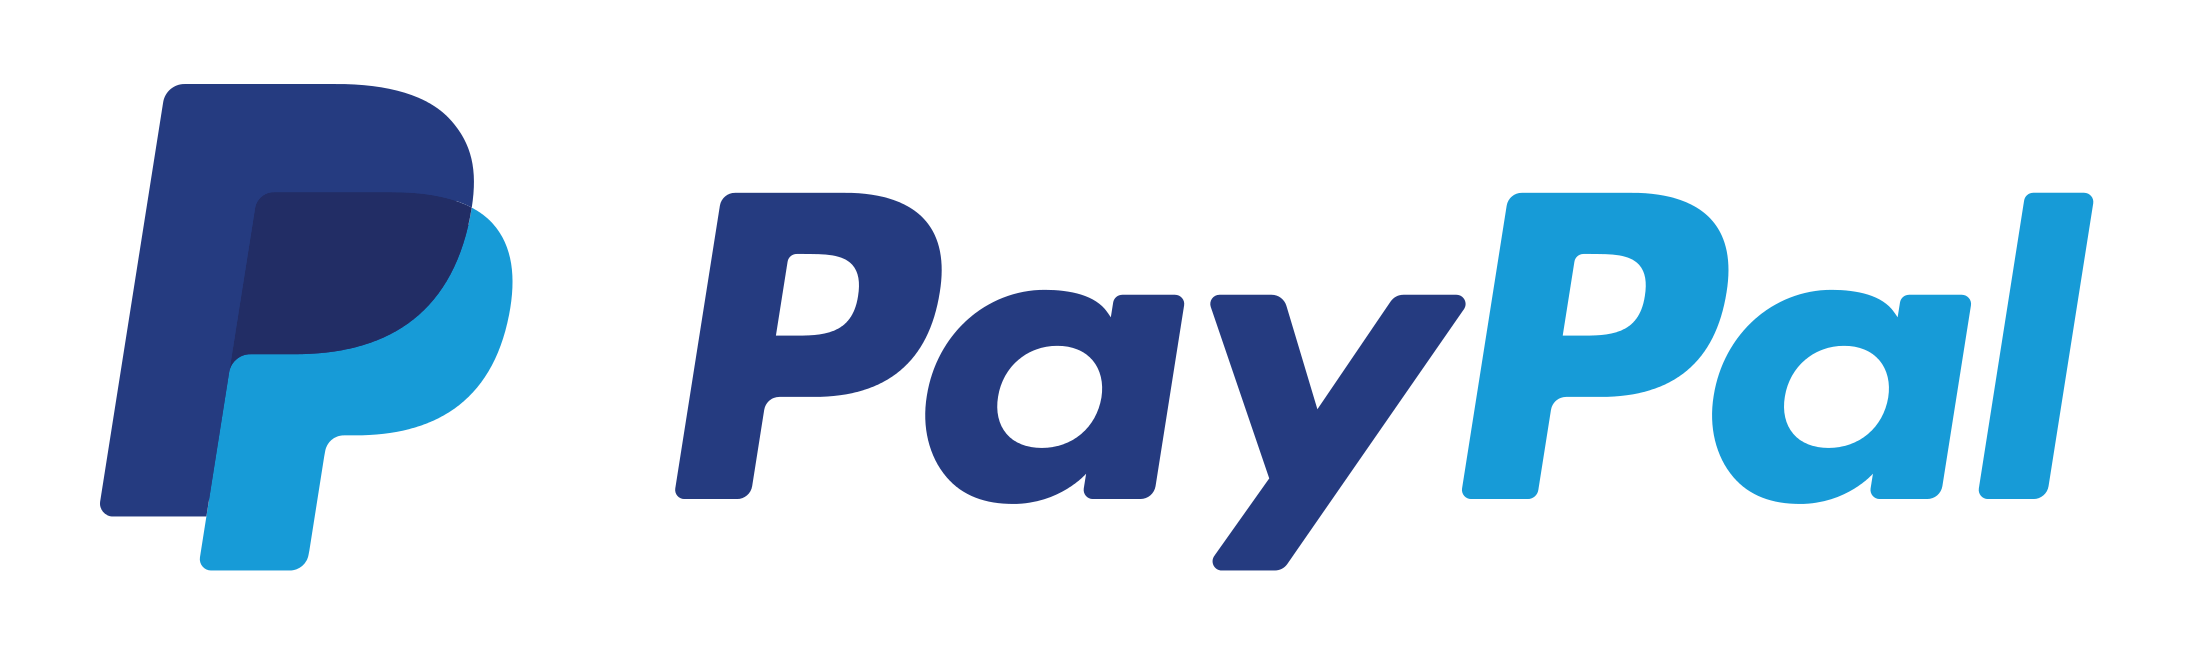 paypal flight offer,paypal flight booking offers,easemytrip paypal offer,paypal makemytrip flight offer,PayPal Yatra Offer